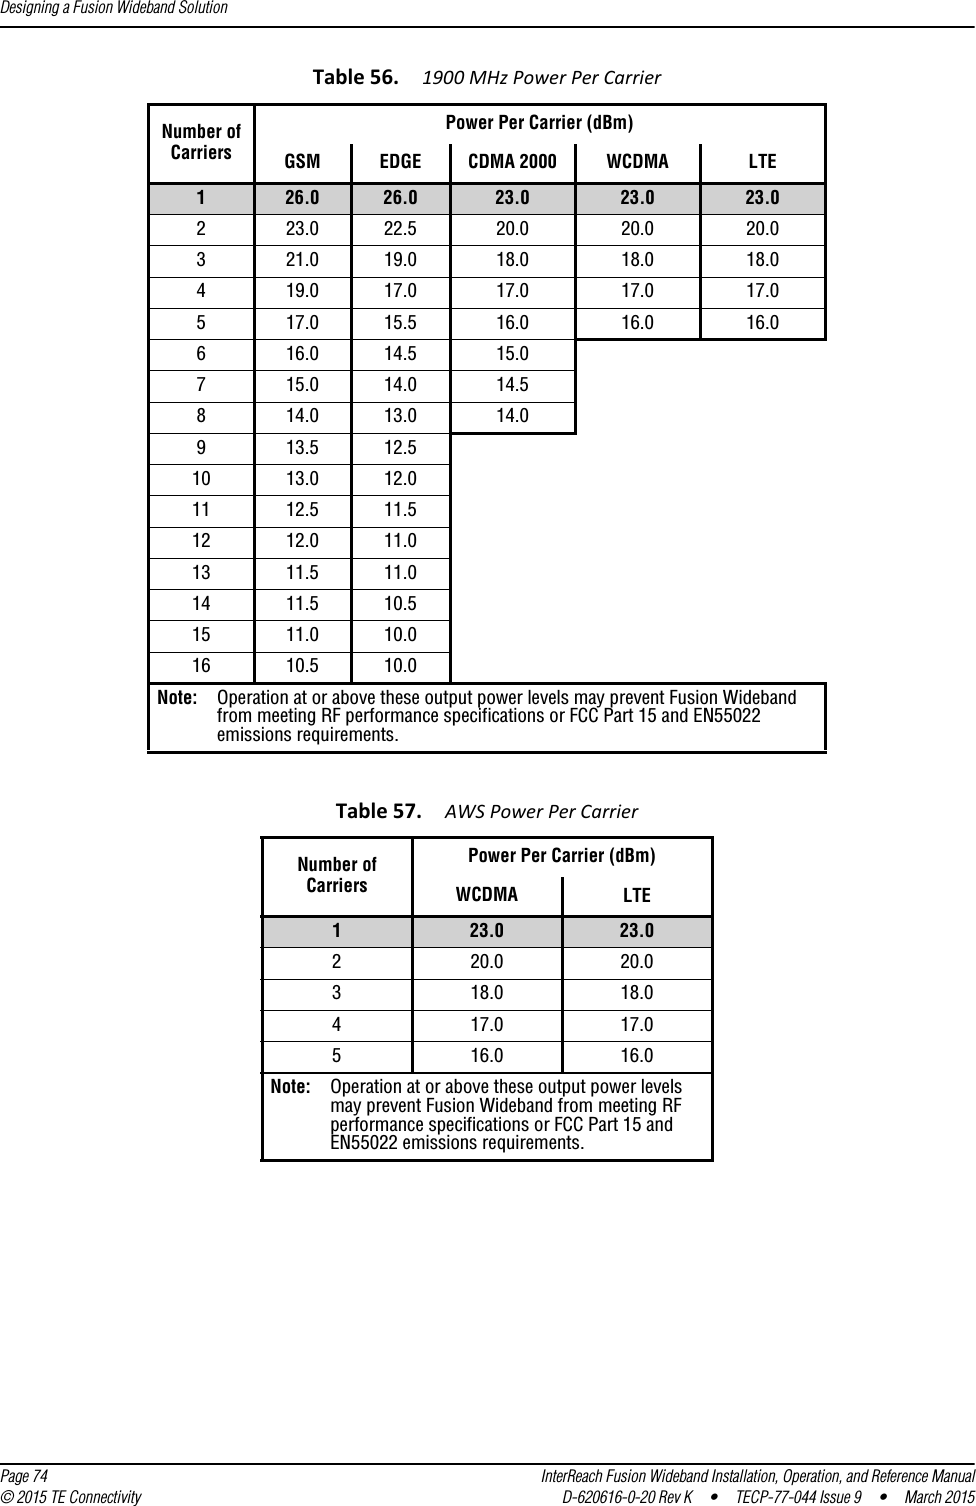 Designing a Fusion Wideband Solution  Page 74 InterReach Fusion Wideband Installation, Operation, and Reference Manual© 2015 TE Connectivity D-620616-0-20 Rev K  •  TECP-77-044 Issue 9  •  March 2015Table 56. 1900 MHz Power Per CarrierNumber ofCarriersPower Per Carrier (dBm)GSM EDGE CDMA 2000 WCDMA LTE126.0 26.0 23.0 23.0 23.0223.0 22.5 20.0 20.0 20.0321.0 19.0 18.0 18.0 18.0419.0 17.0 17.0 17.0 17.0517.0 15.5 16.0 16.0 16.0616.0 14.5 15.0715.0 14.0 14.5814.0 13.0 14.0913.5 12.510 13.0 12.011 12.5 11.512 12.0 11.013 11.5 11.014 11.5 10.515 11.0 10.016 10.5 10.0Note: Operation at or above these output power levels may prevent Fusion Wideband from meeting RF performance specifications or FCC Part 15 and EN55022 emissions requirements. Table 57. AWS Power Per CarrierNumber of CarriersPower Per Carrier (dBm)WCDMA LTE123.0 23.0220.0 20.0318.0 18.0417.0 17.0516.0 16.0Note: Operation at or above these output power levels may prevent Fusion Wideband from meeting RF performance specifications or FCC Part 15 and EN55022 emissions requirements. 